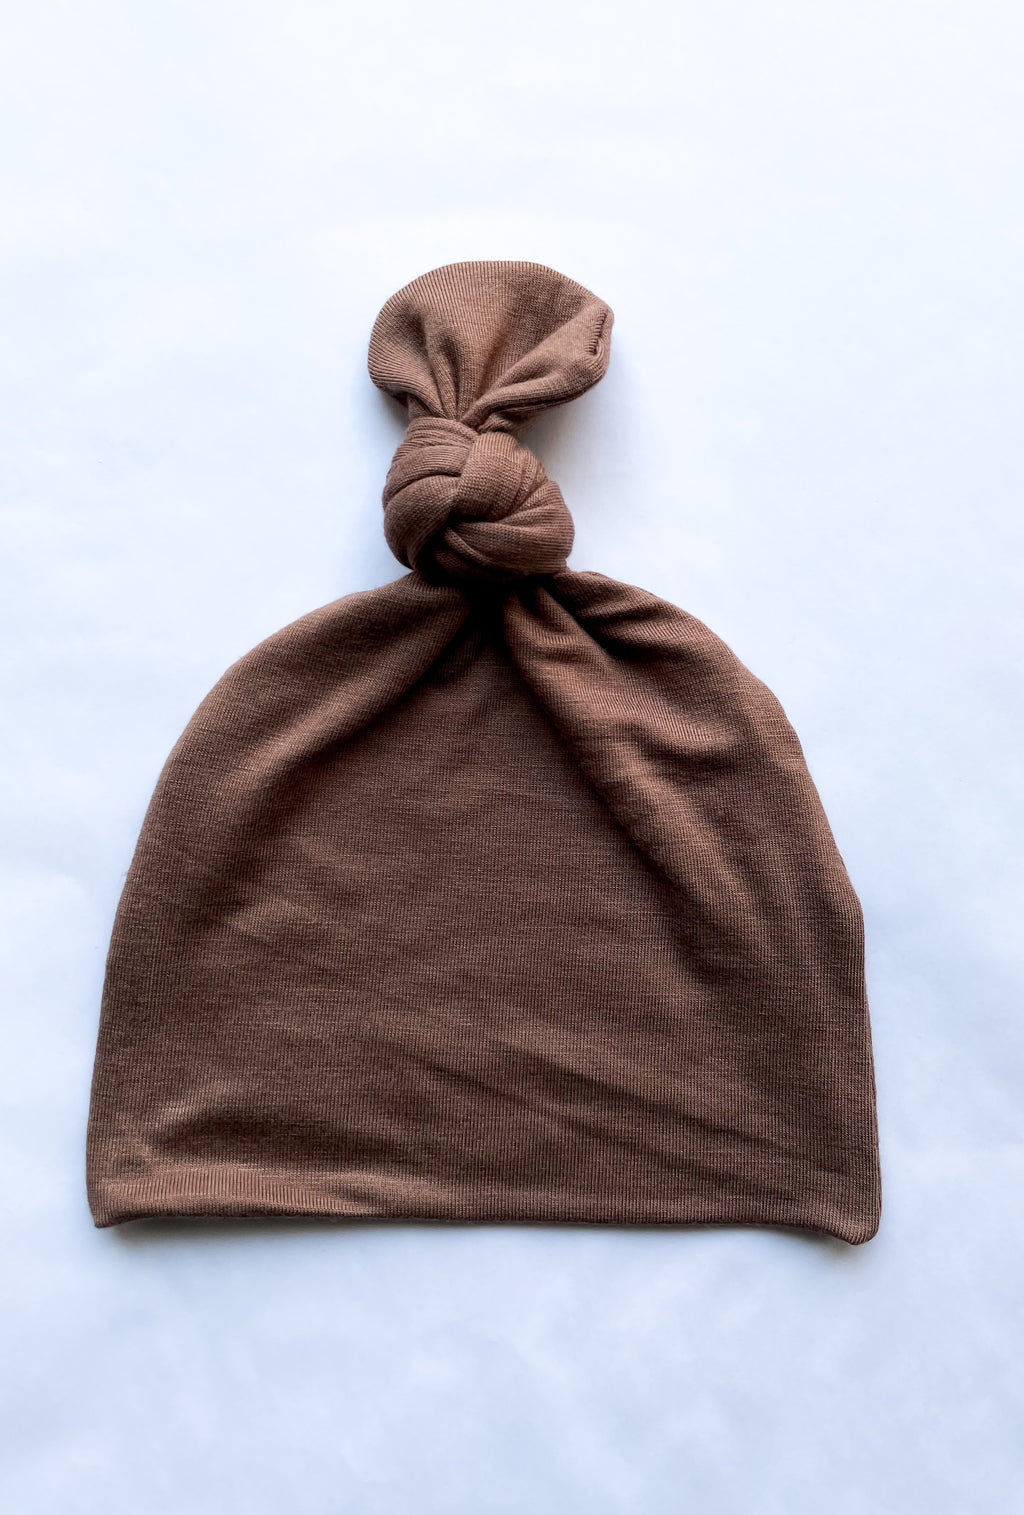 Asher Espresso Brown Top Knot Hat